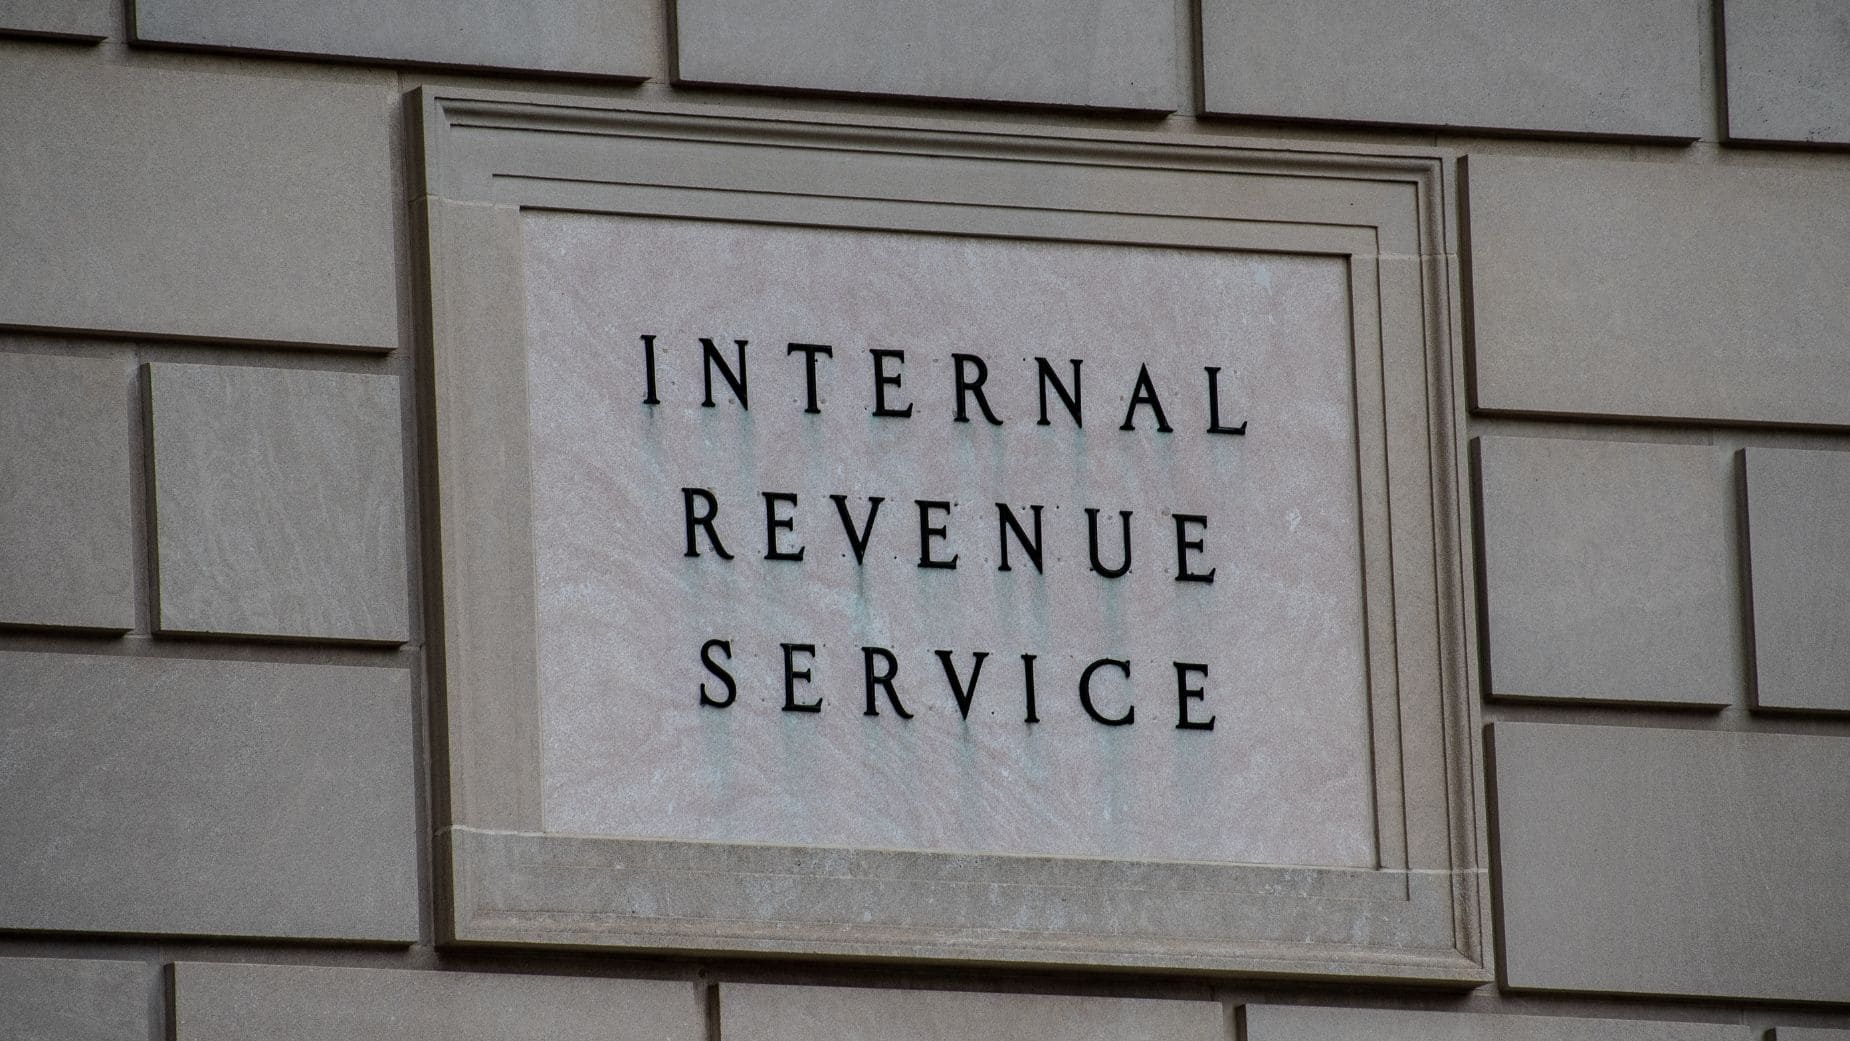 This is the recommendation from the IRS to get the Tax Refund earlier